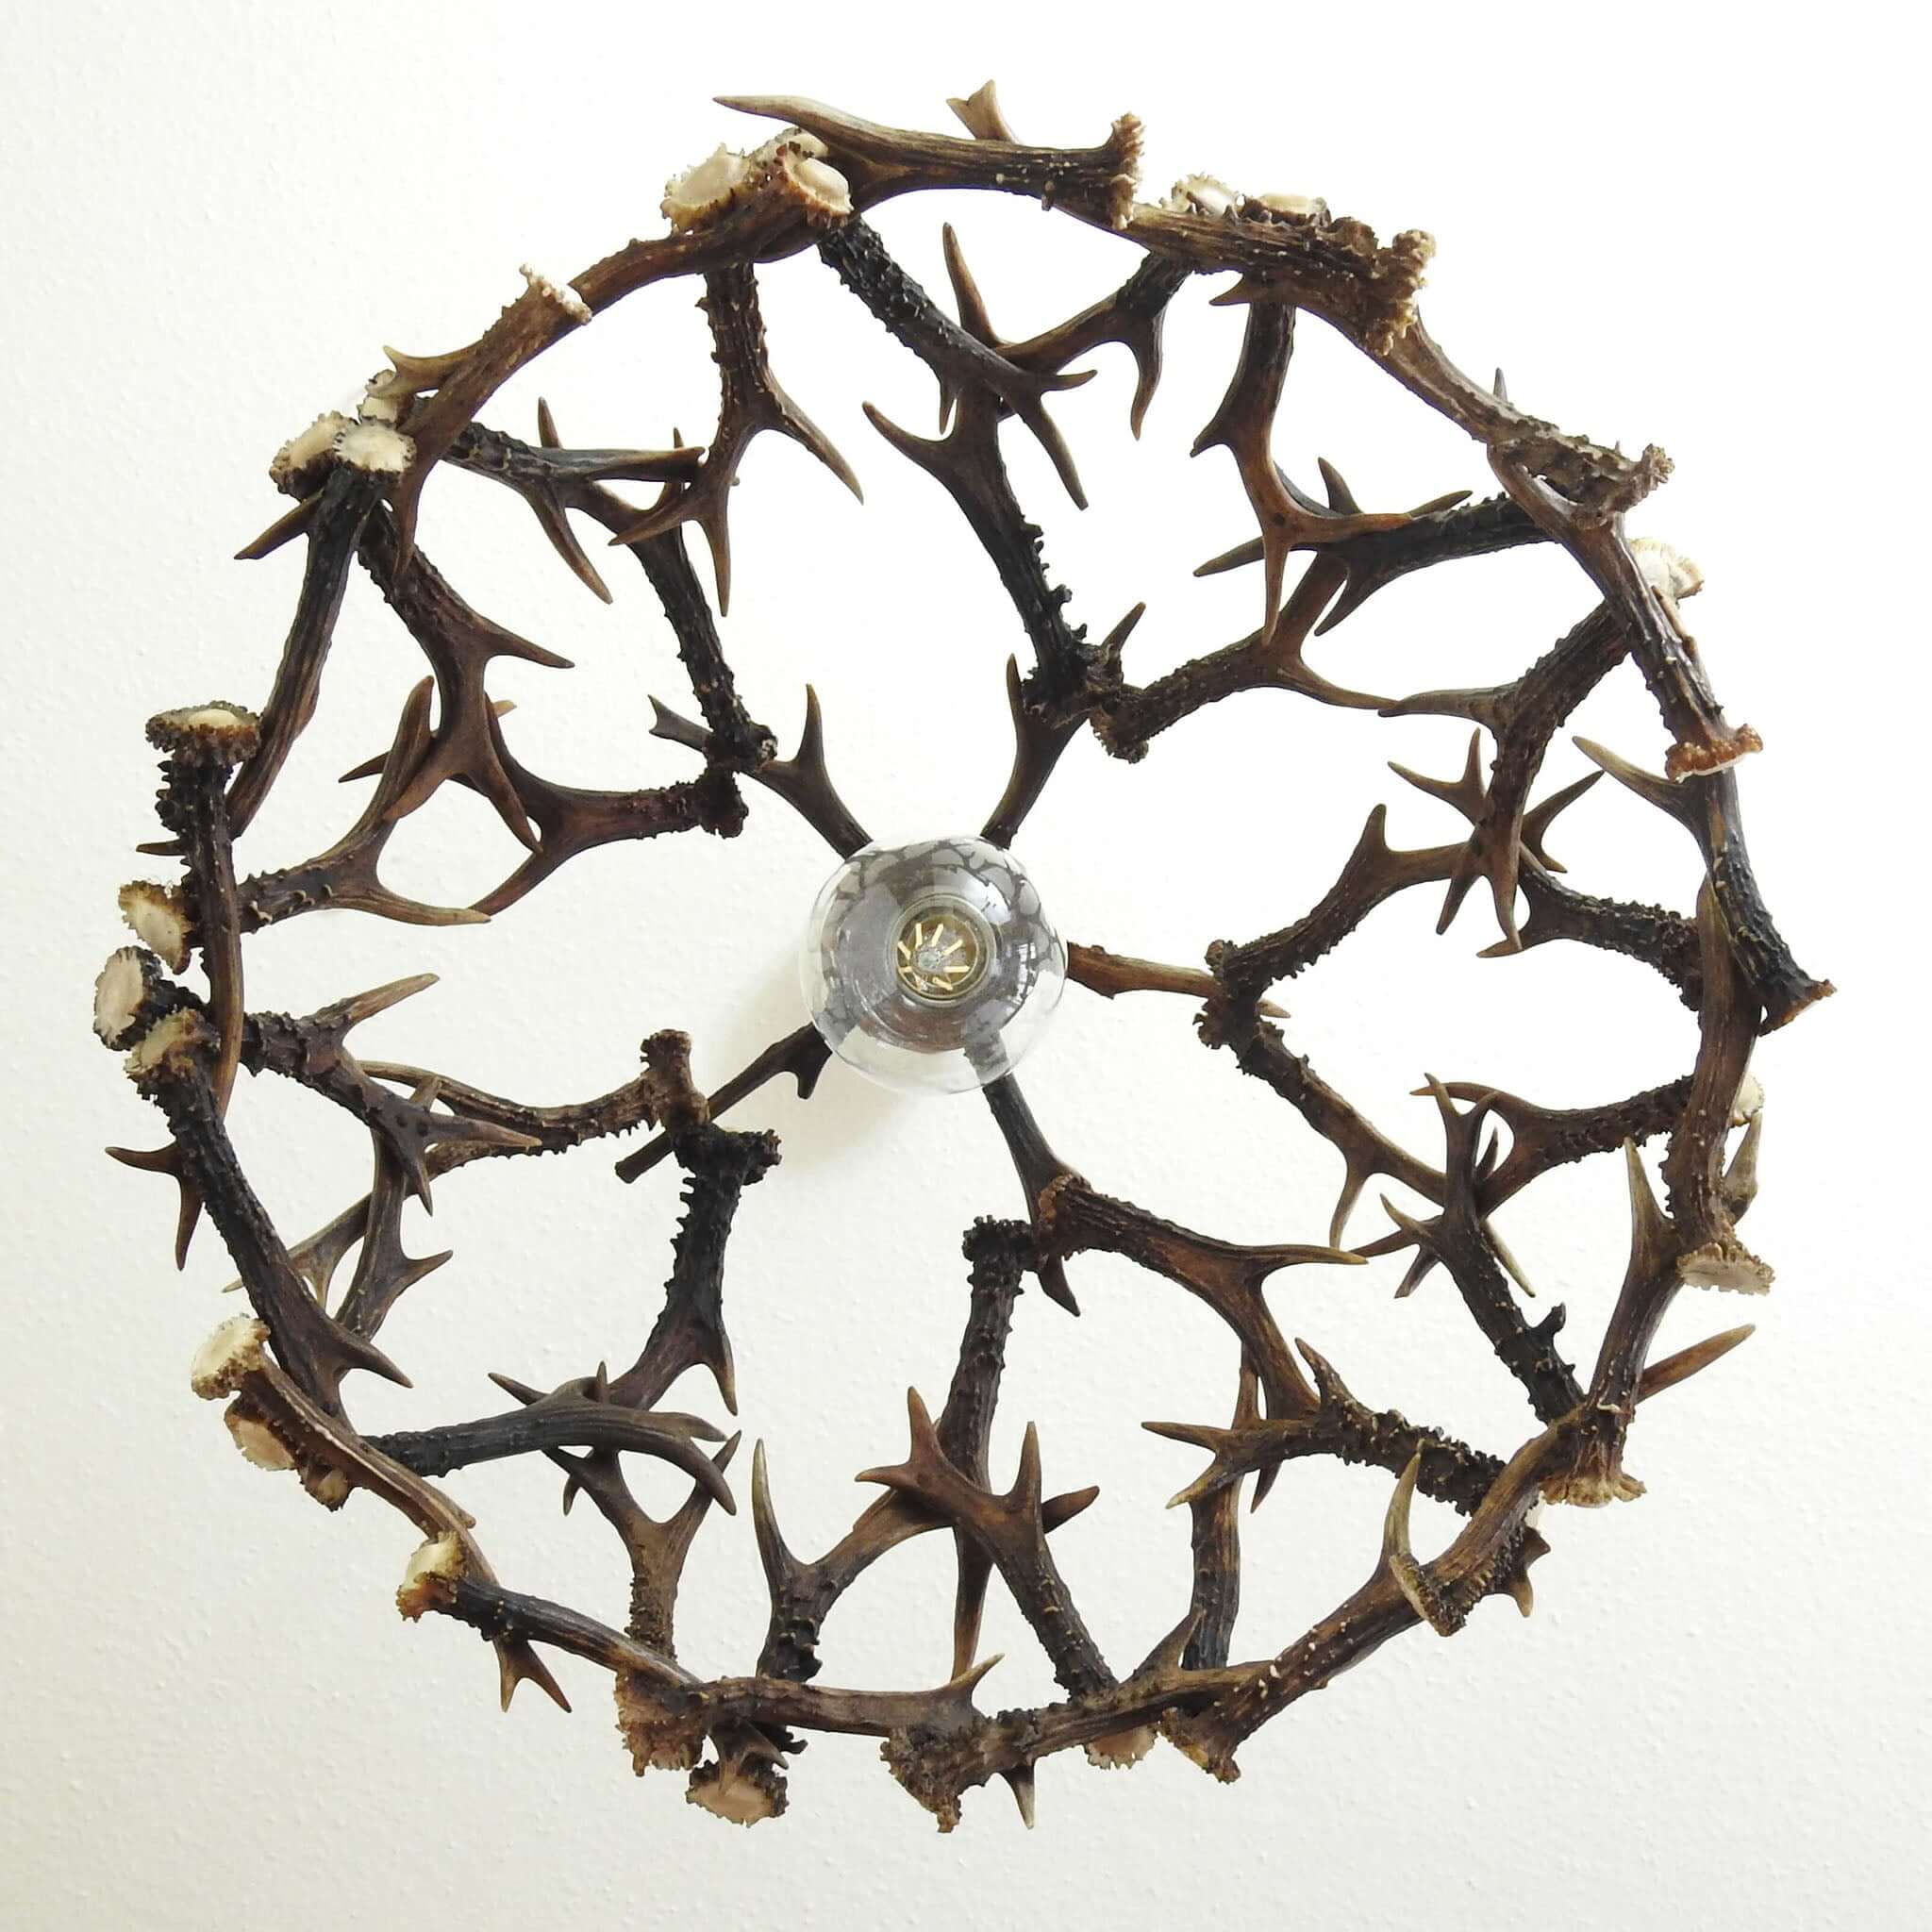 Small antler chandelier, view from the bottom.